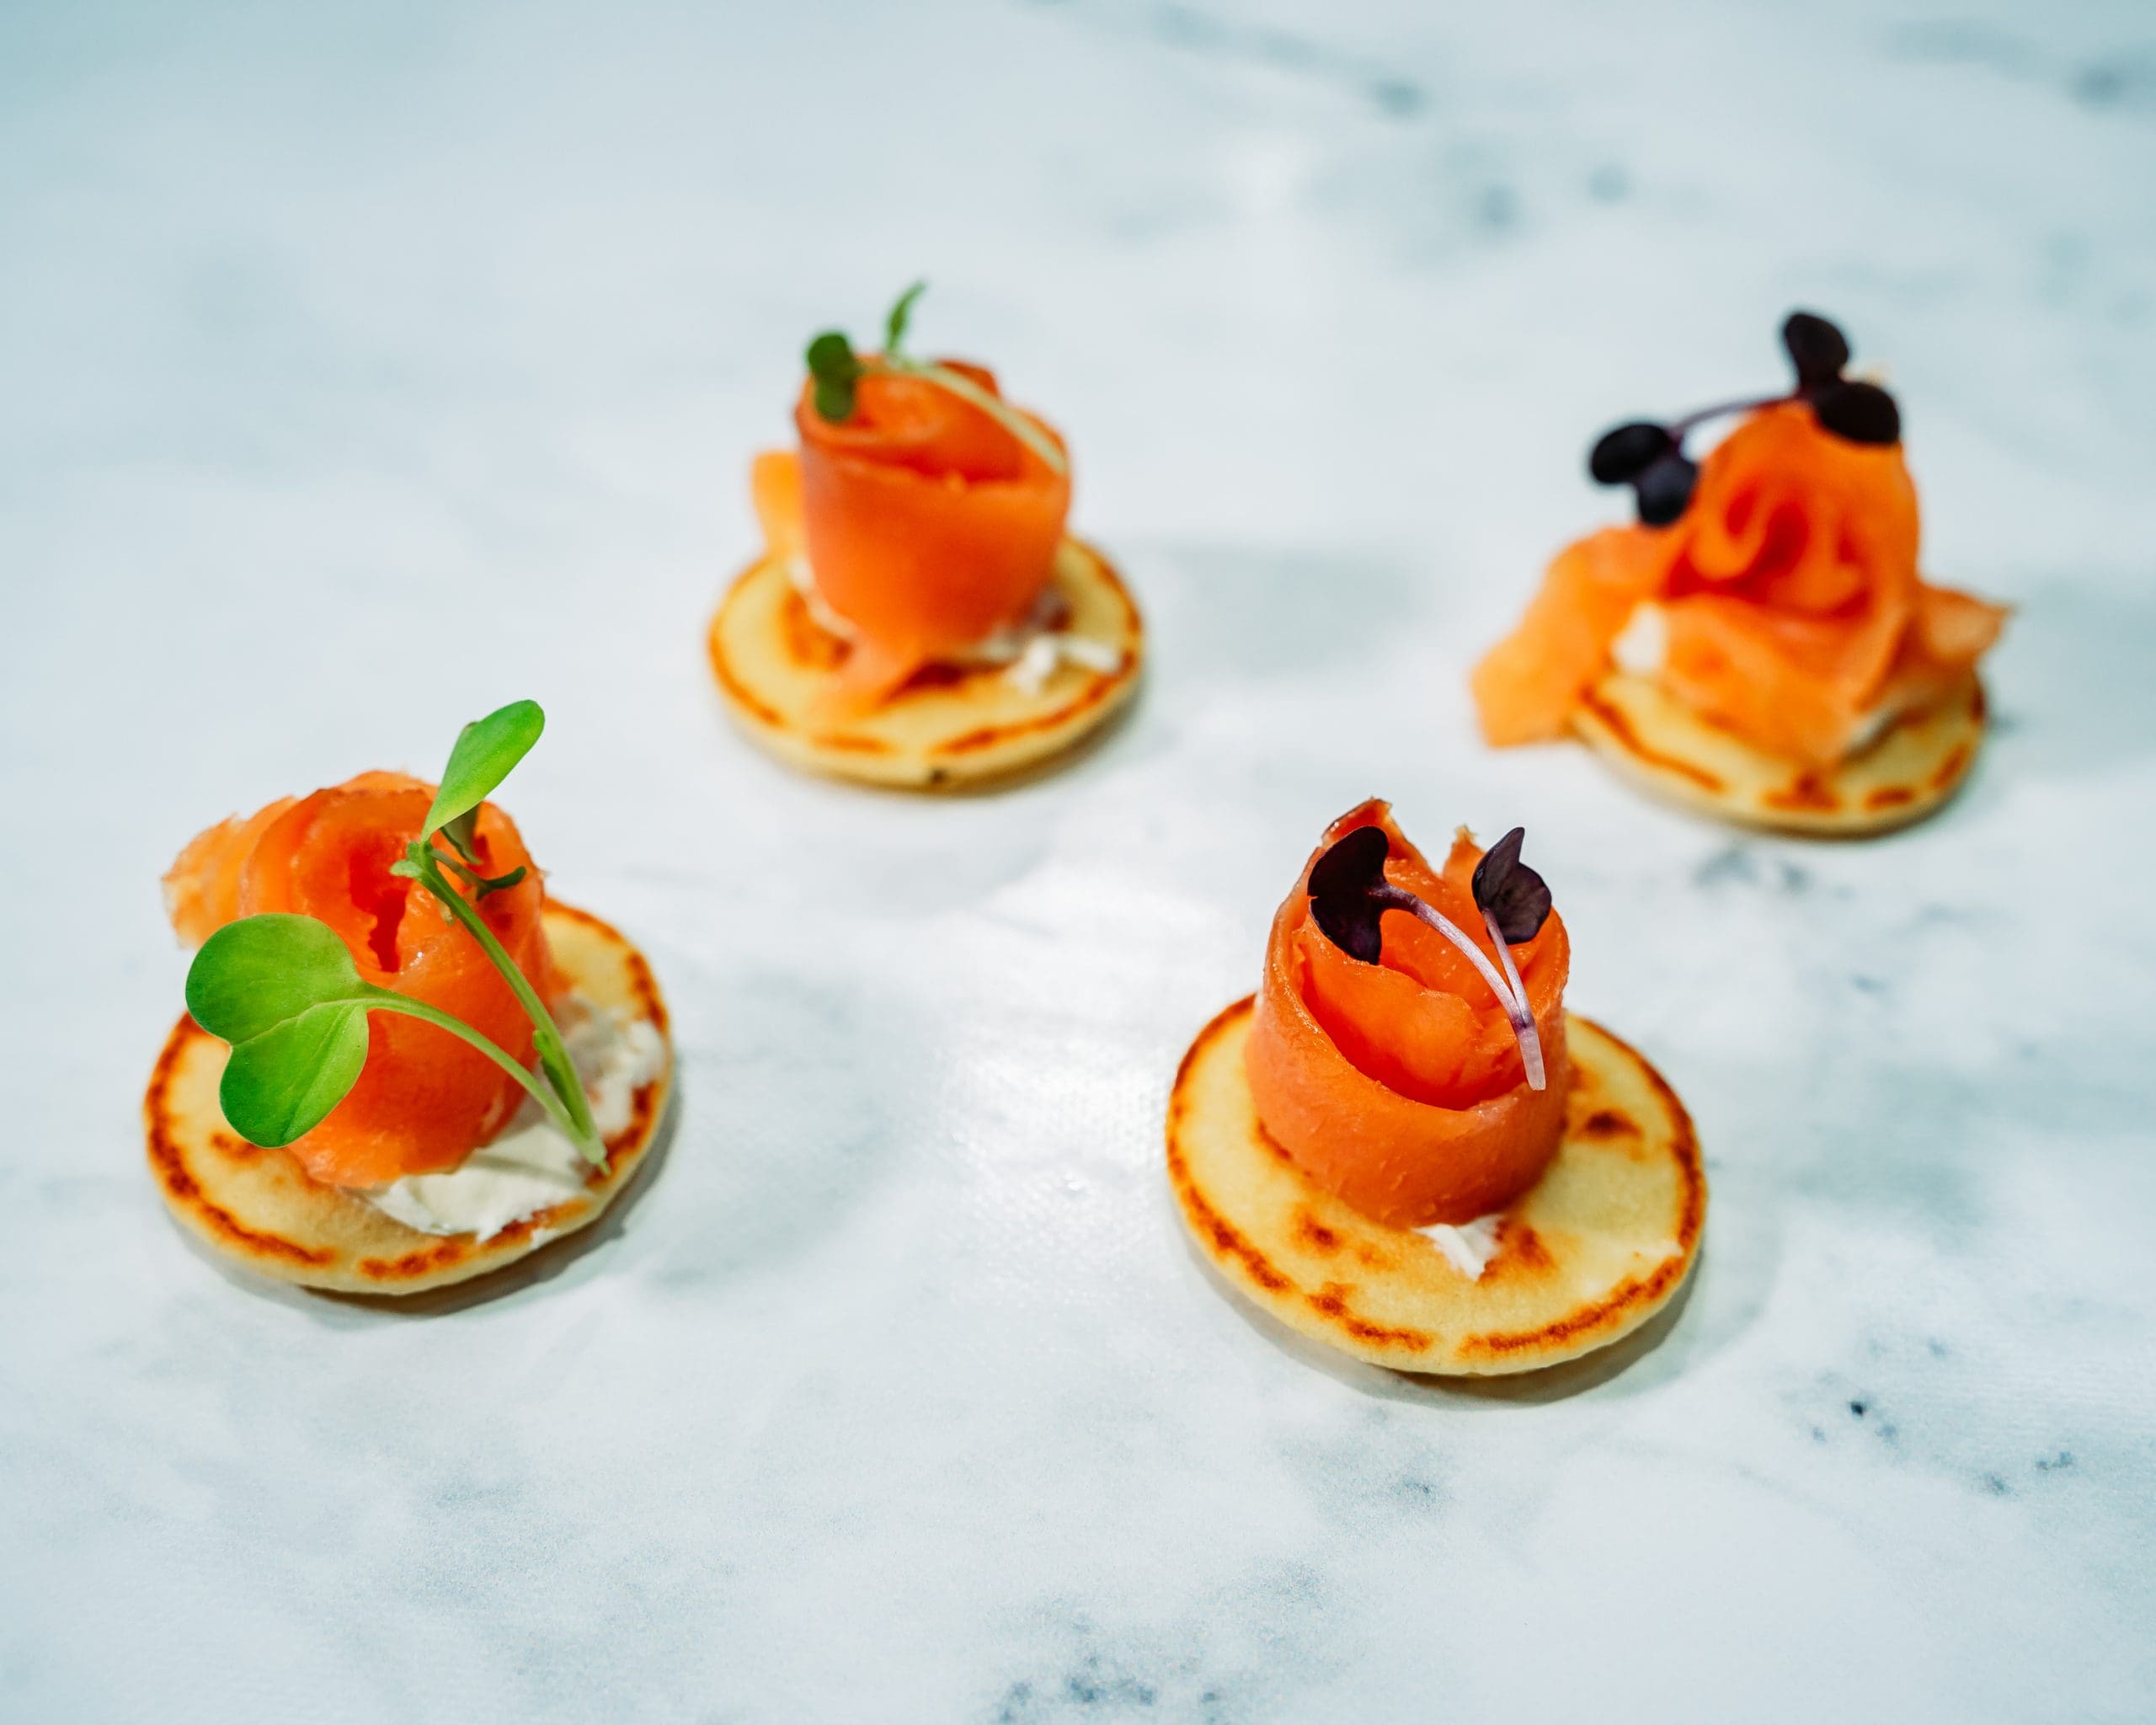 Salmon and Goats cheese Blini